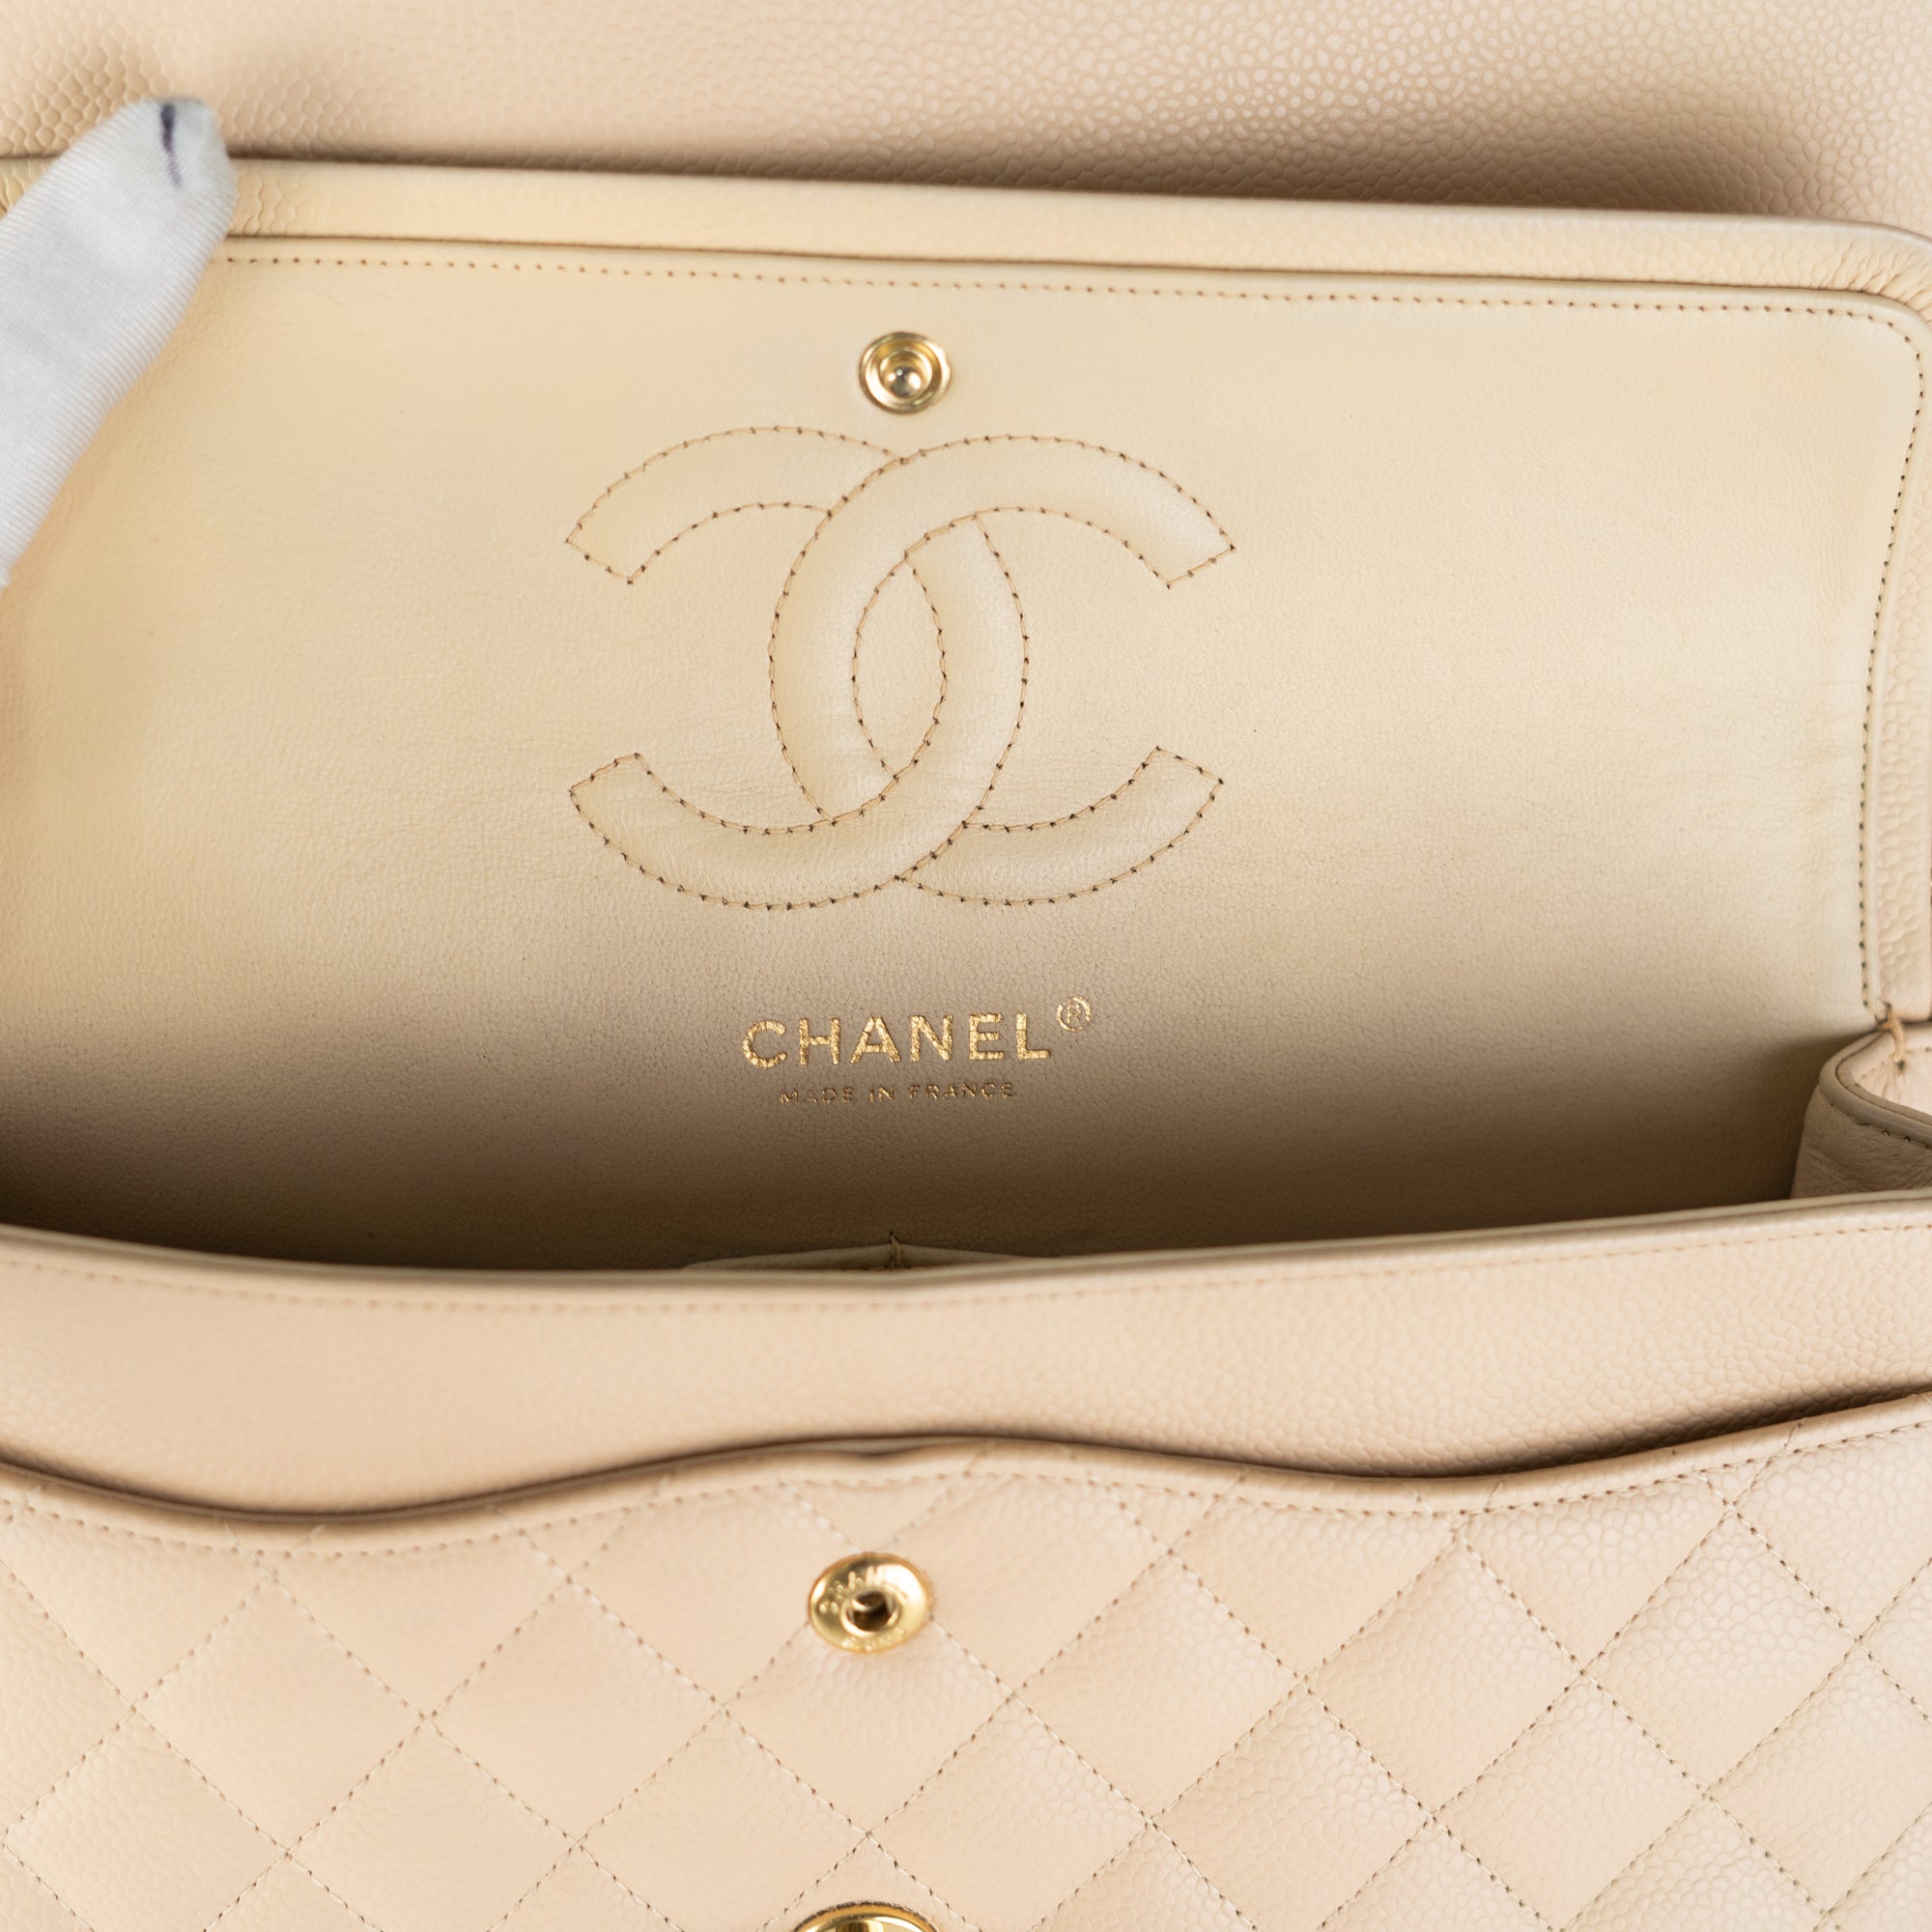 Chanel Unboxing  Beige Classic Flap in size ml  YouTube